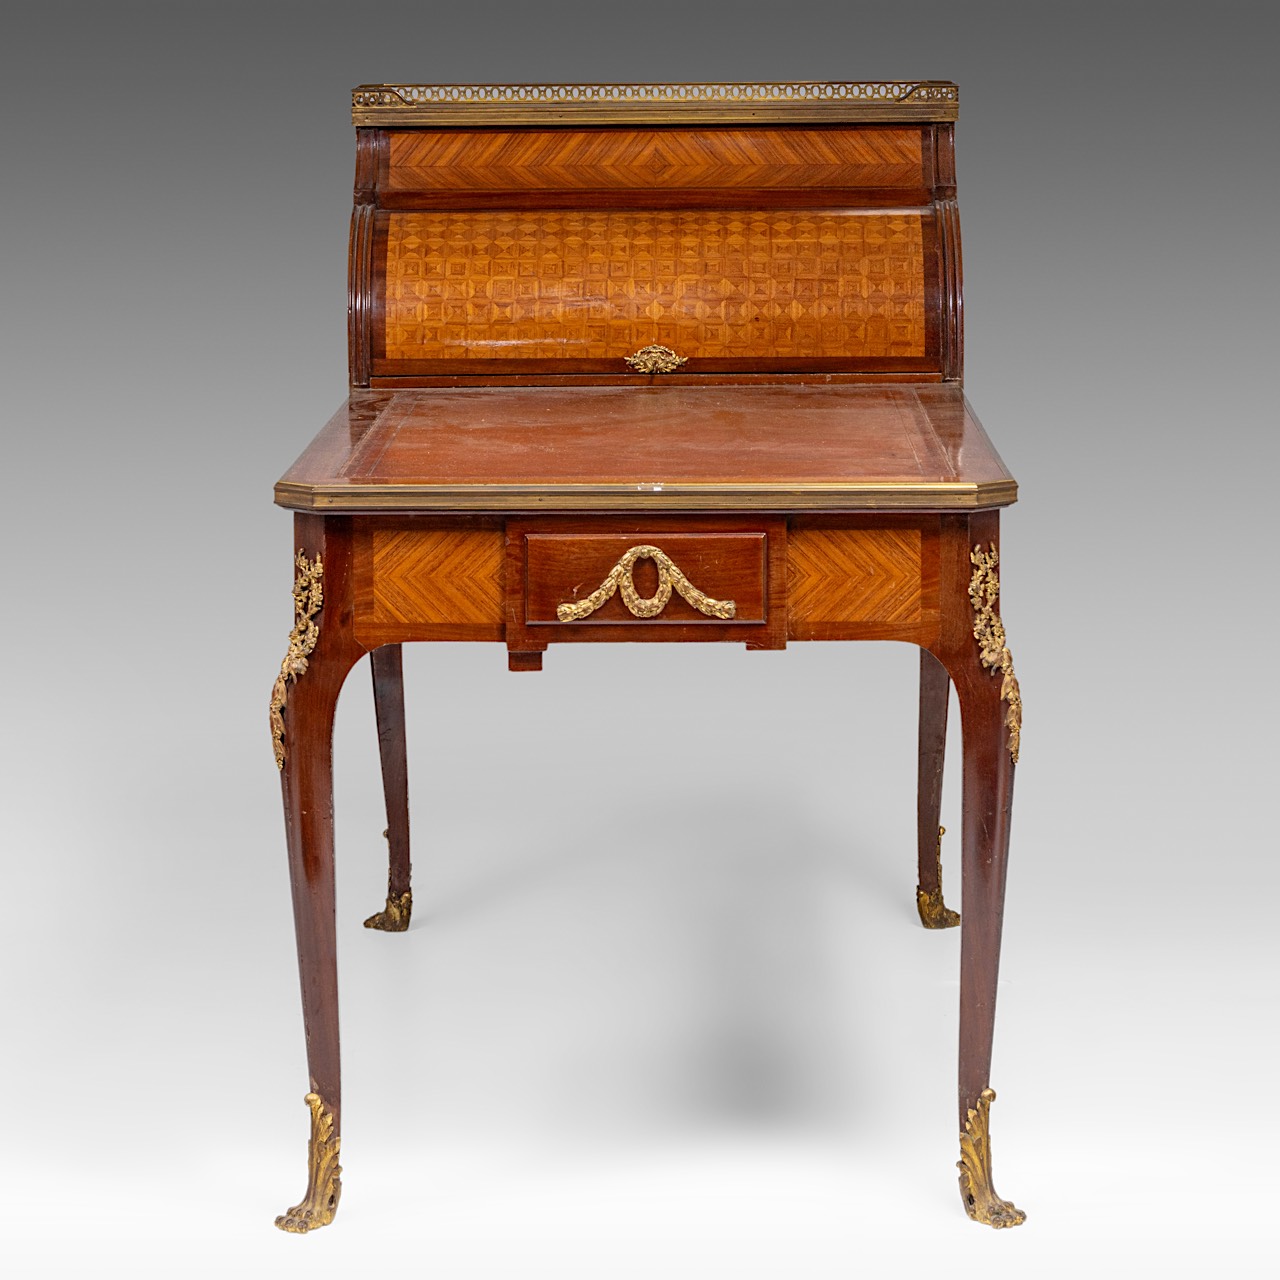 A leather-topped Transitional-style bureau plat and rolltop desk with parquetry and gilt bronze moun - Image 3 of 9